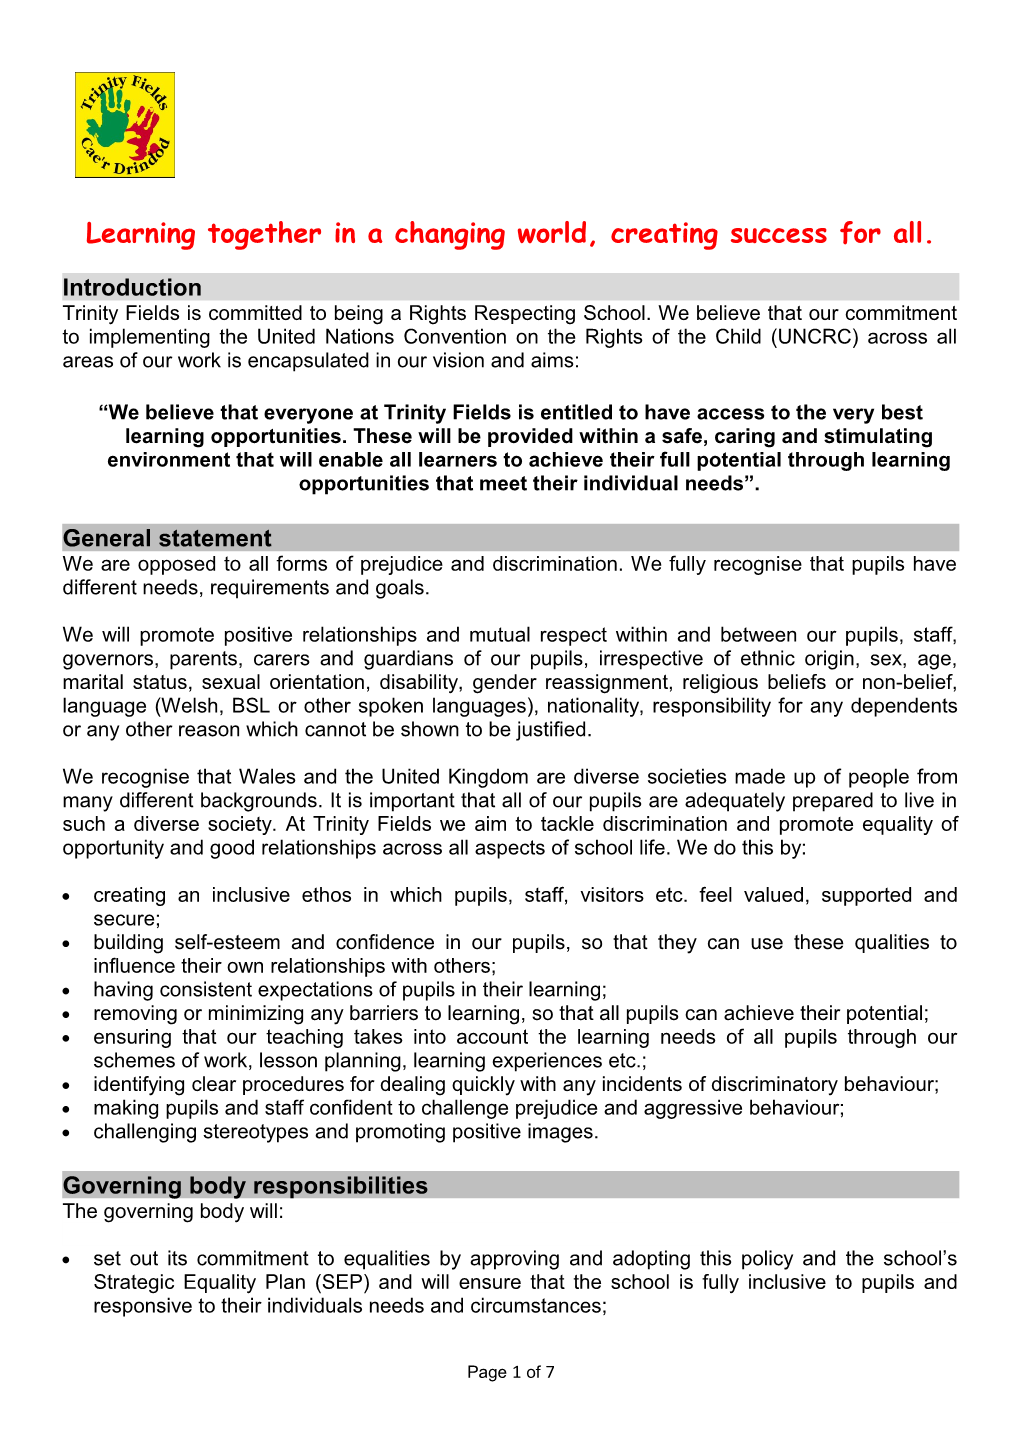 Learning Together in a Changing World, Creating Success for All